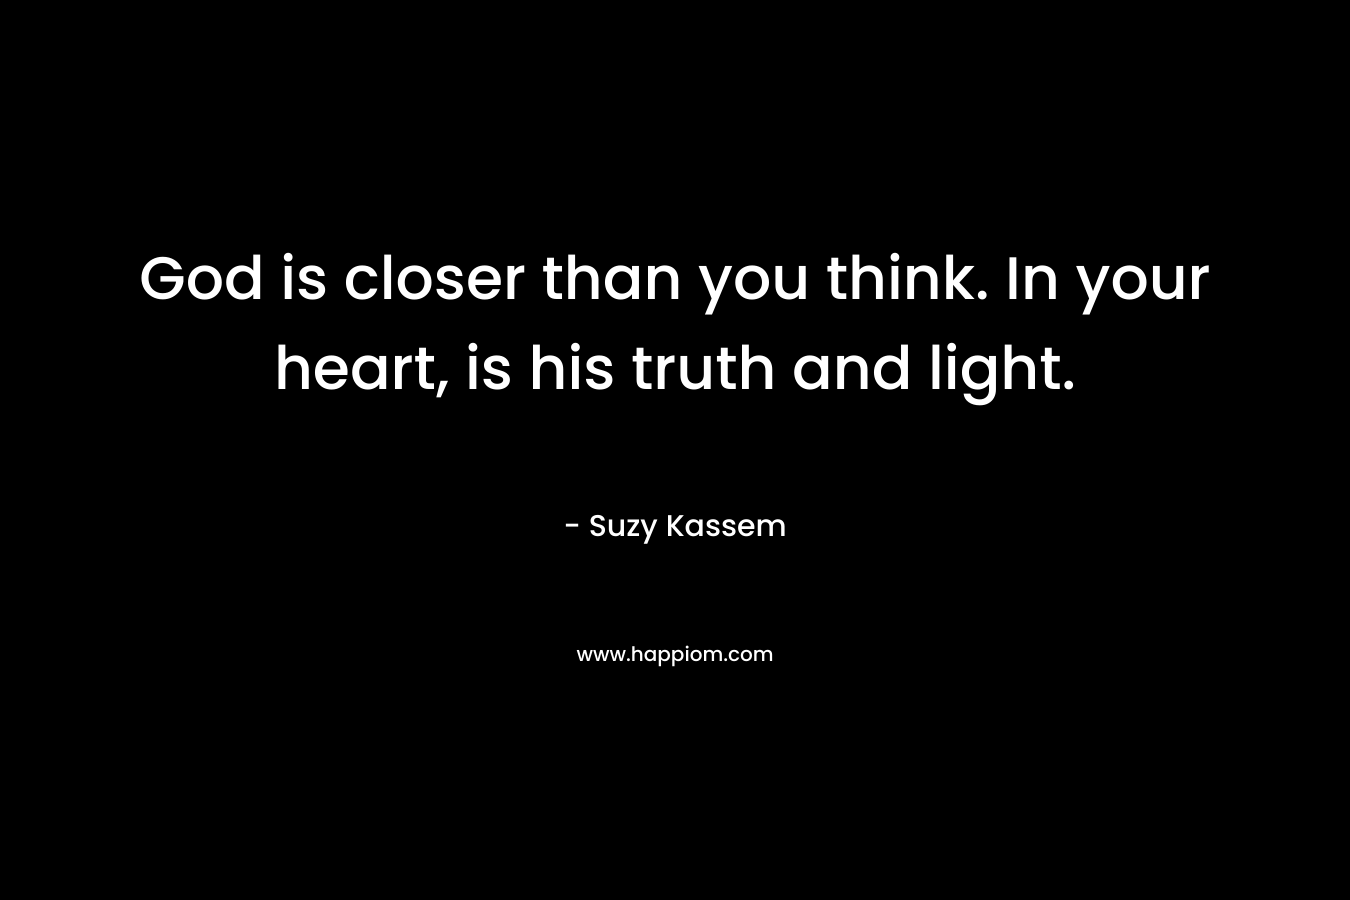 God is closer than you think. In your heart, is his truth and light.